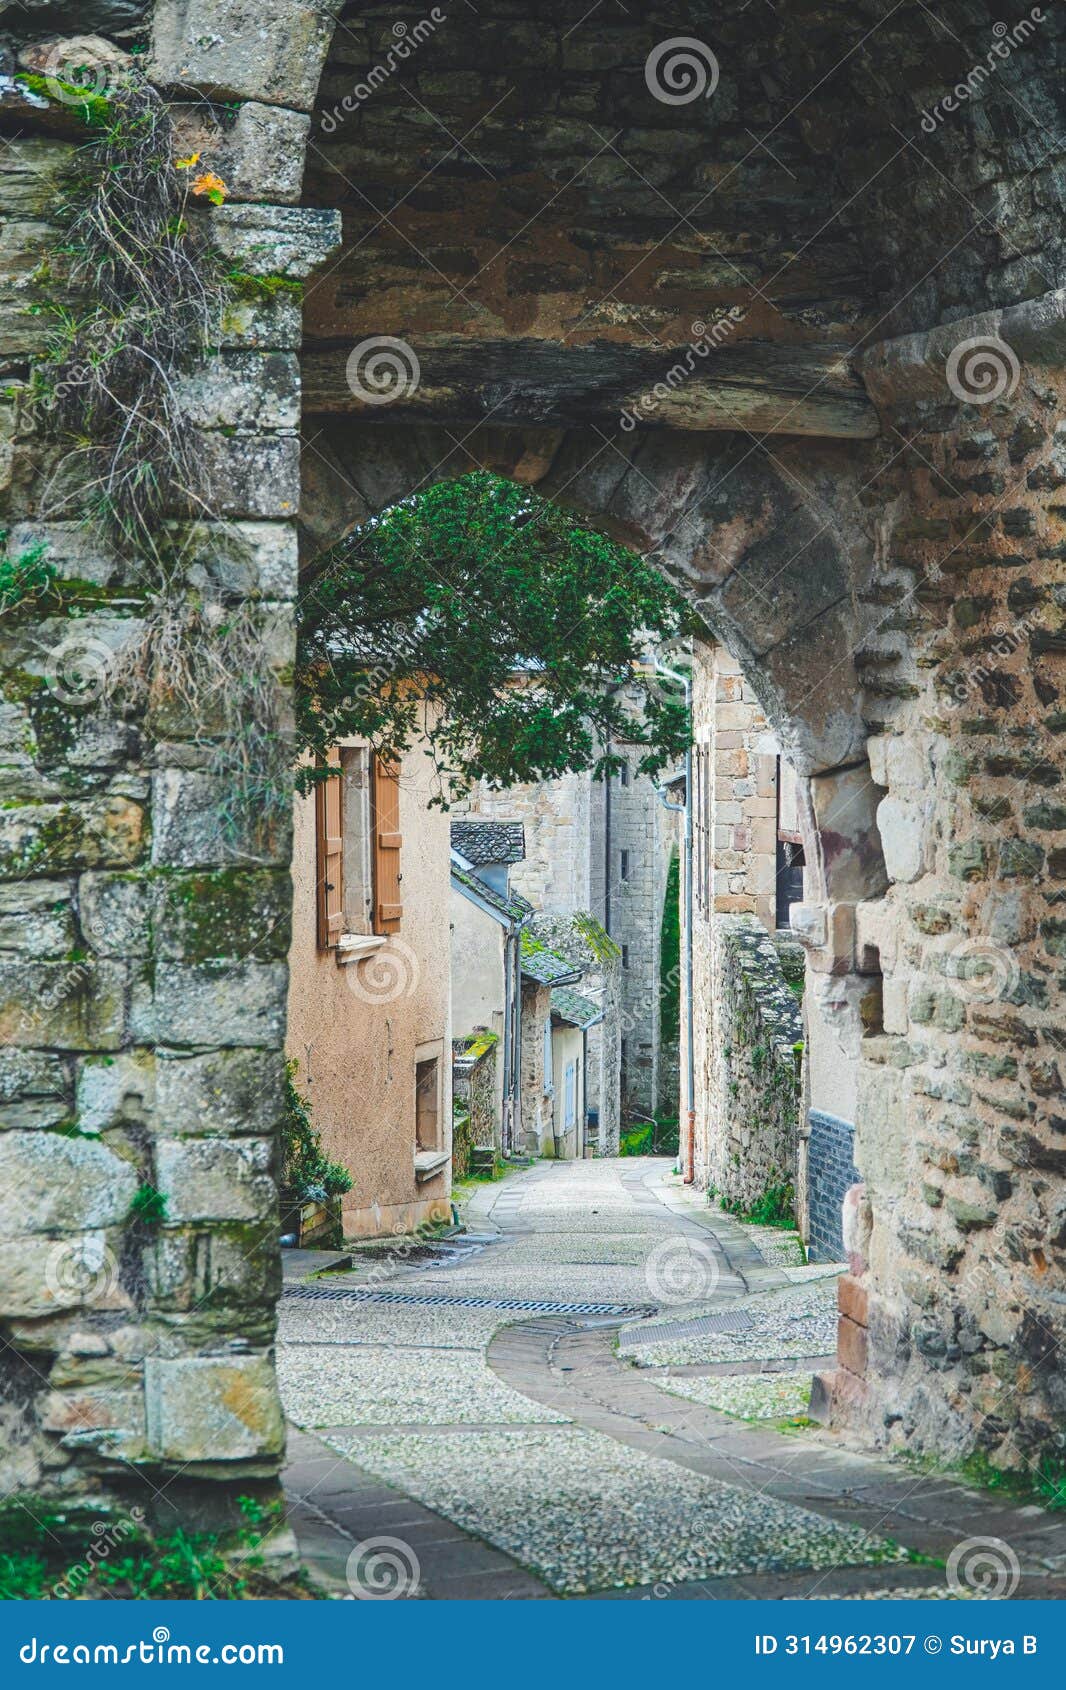 picturesque pathways: exploring the quaint streetscapes of old french villages.